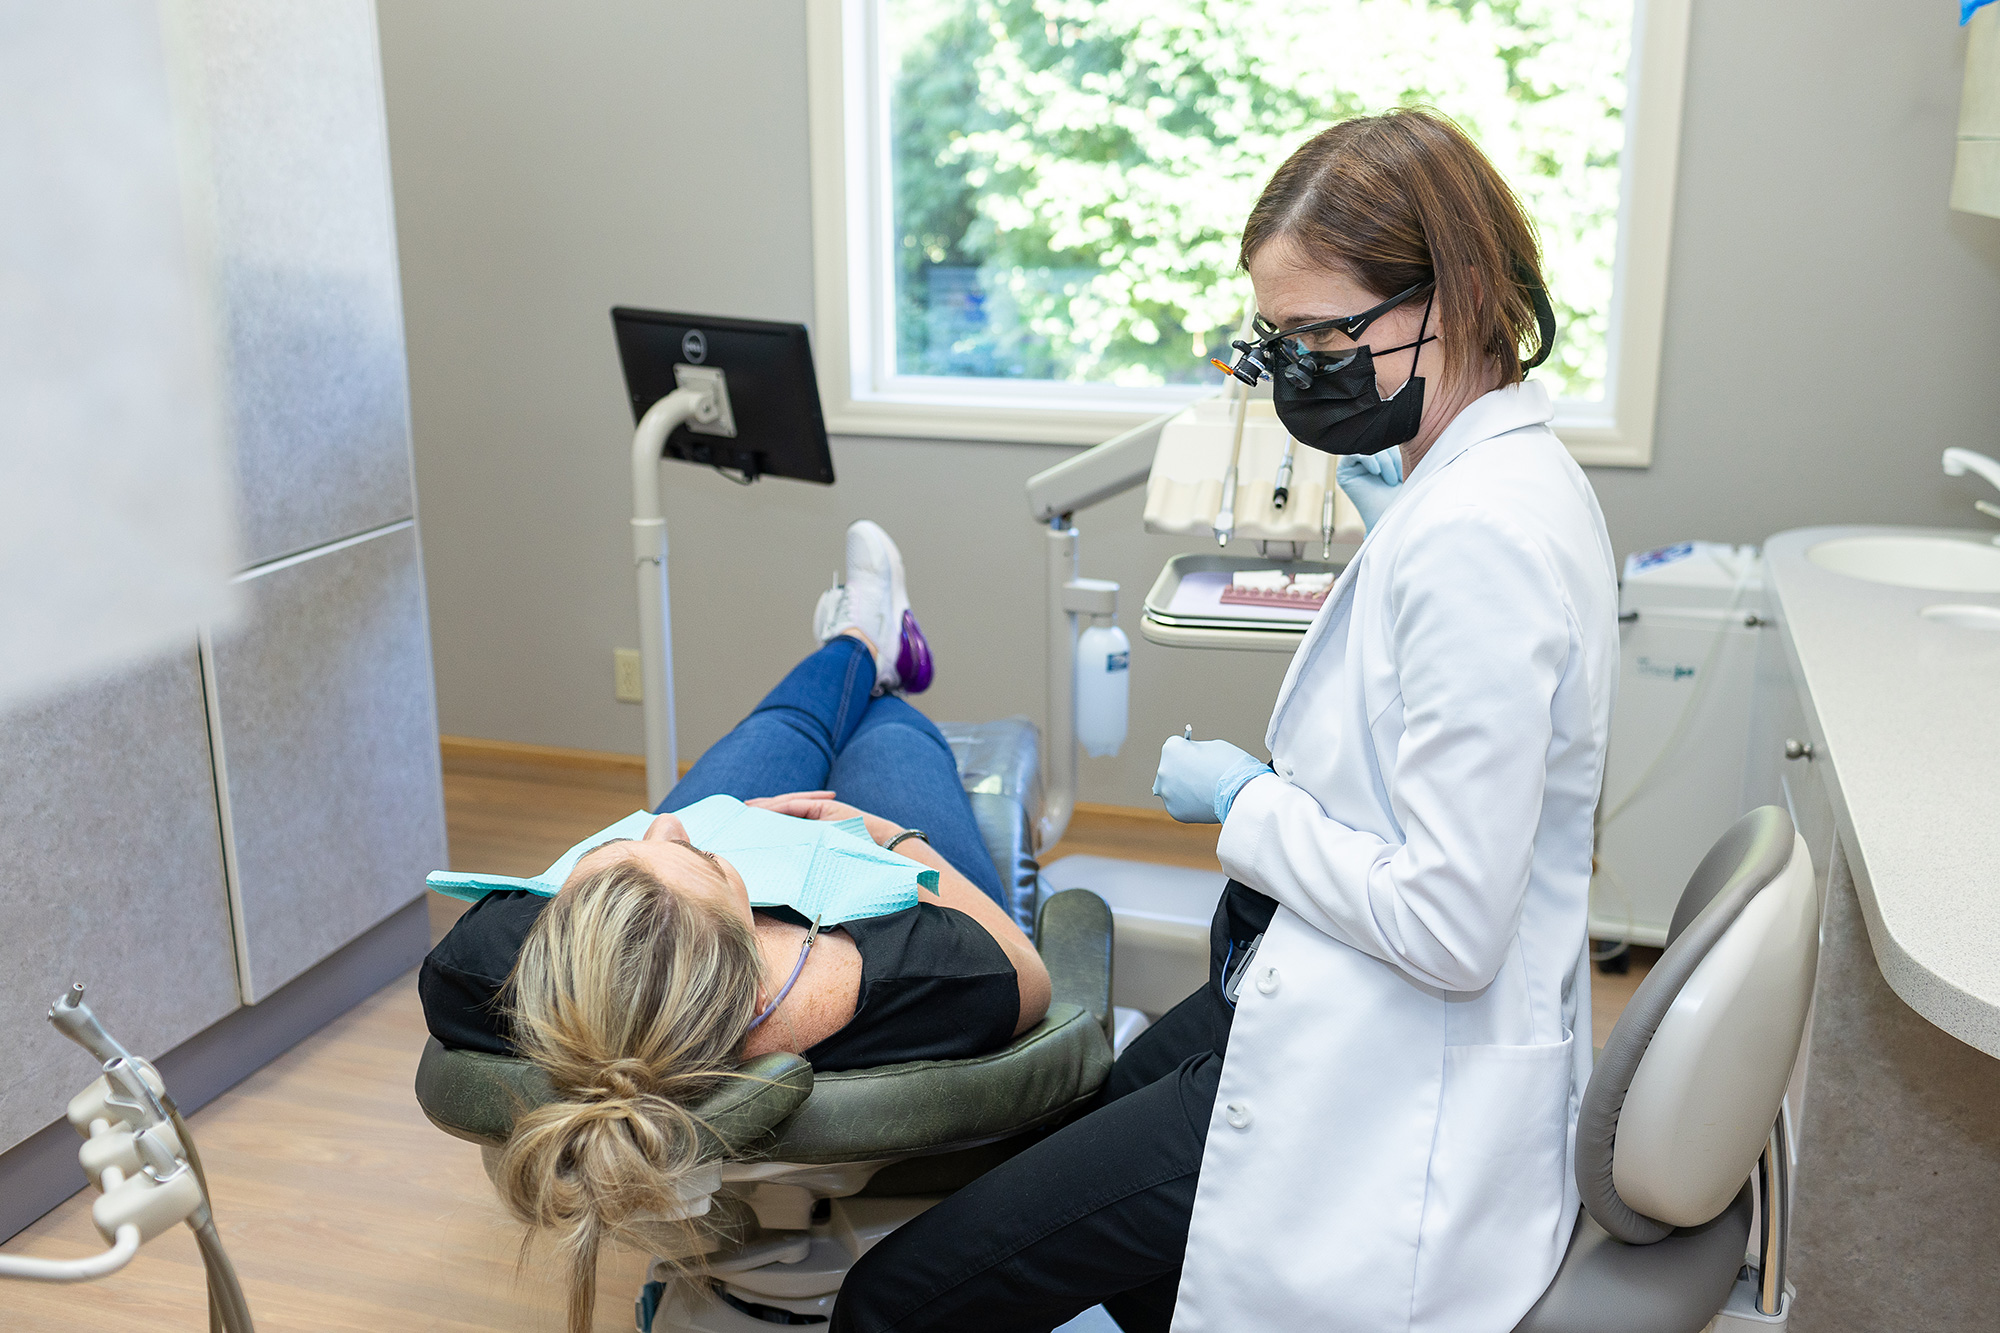 Dr. Matlock speaking with a patient at Matlock Dental in Eugene, Oregon.